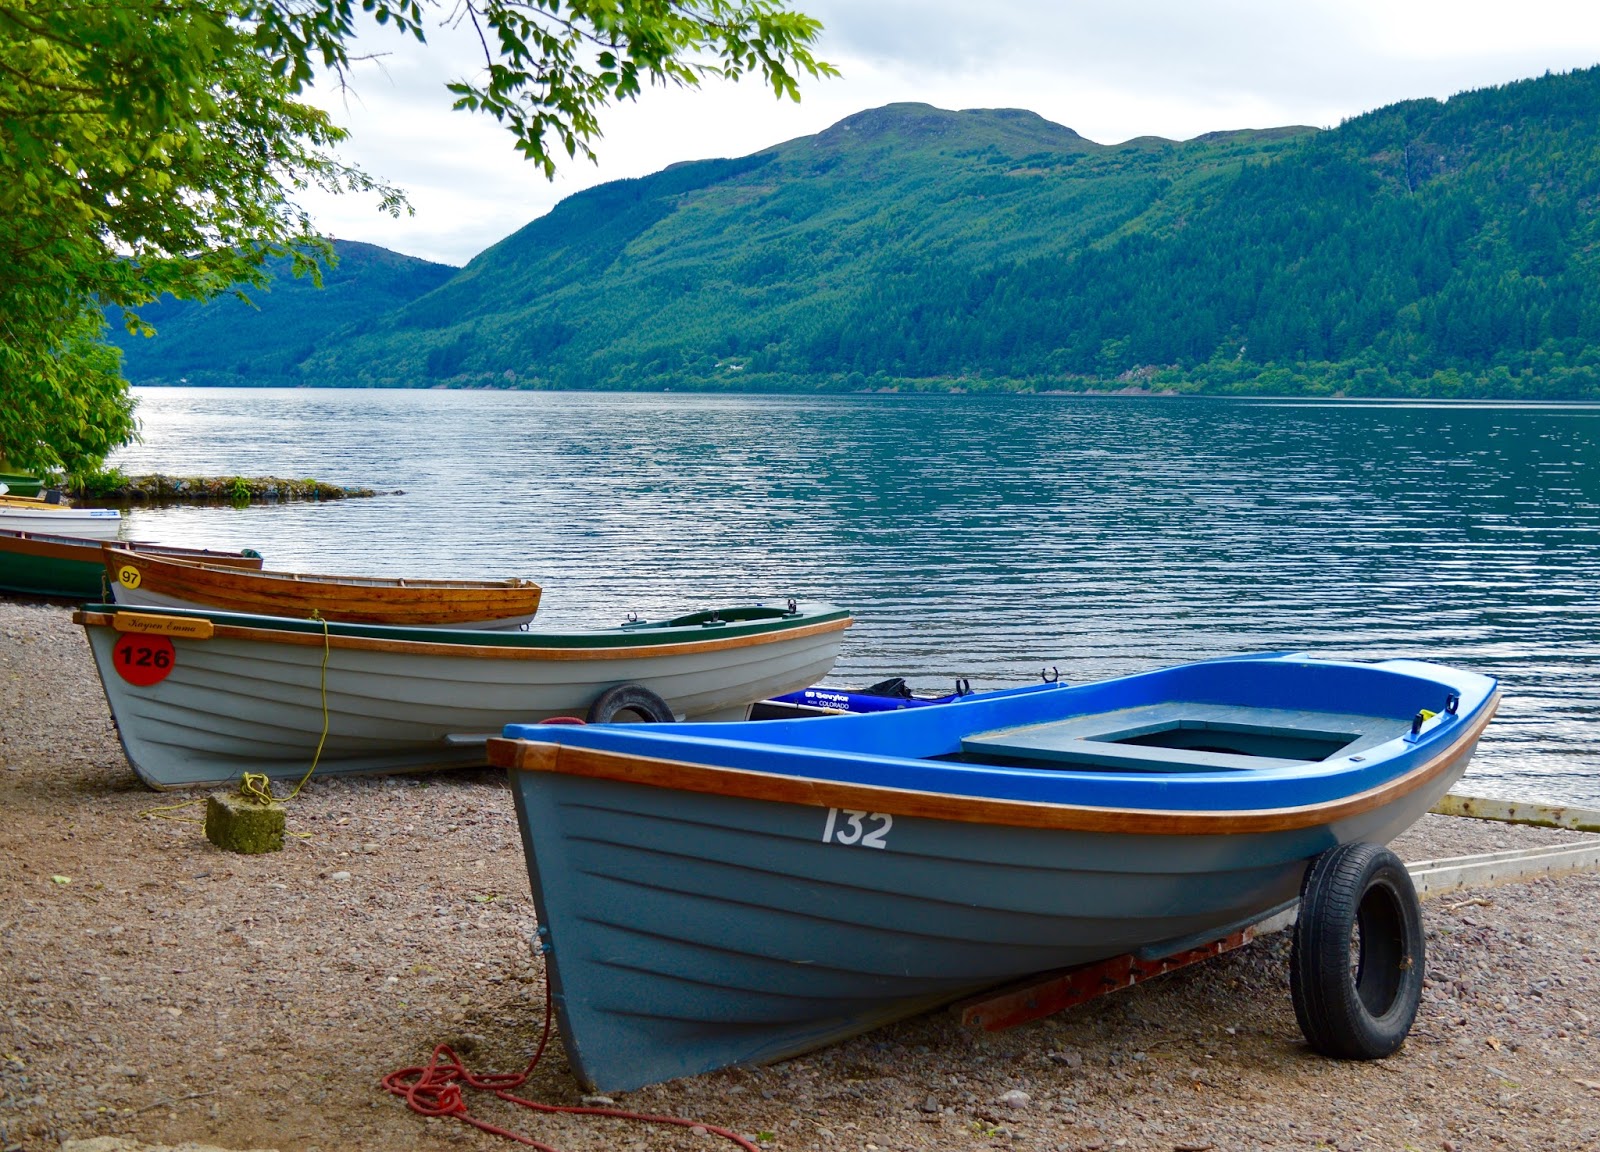 Loch Ness Shores Campsite | A Review - boats to hire